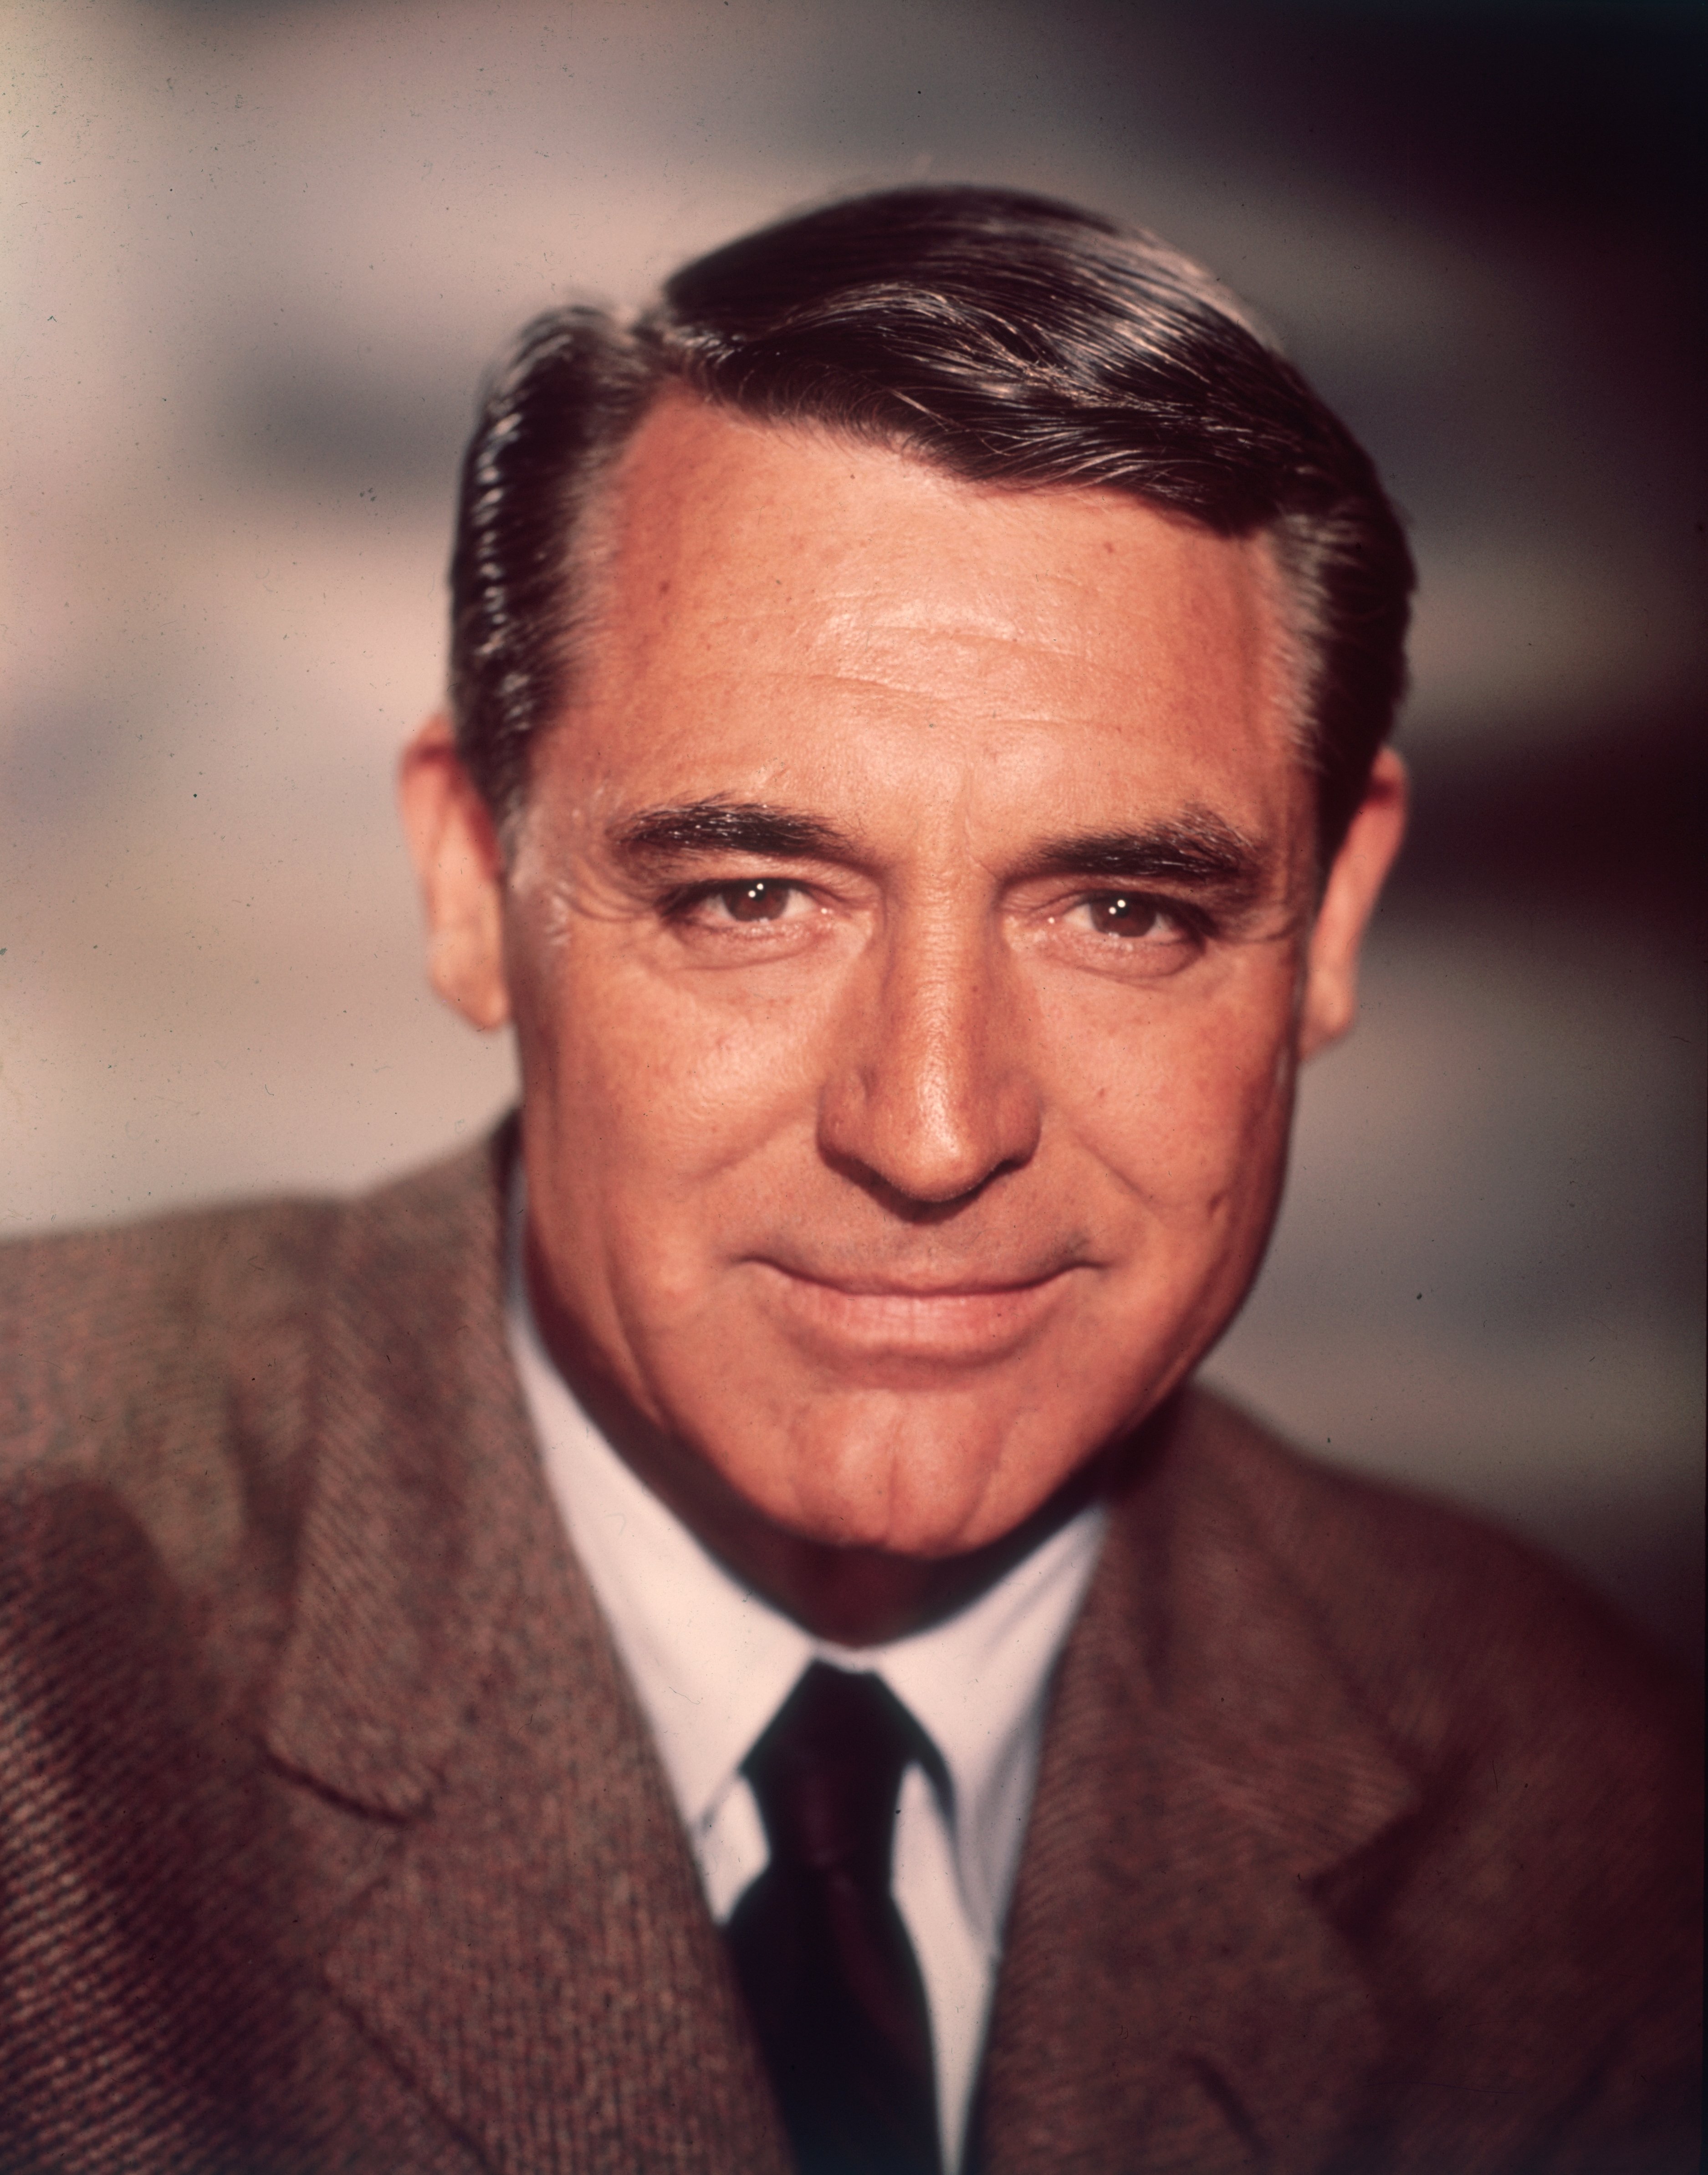 An undated image of American actor Cary Grant who starred in several Hitchcock films | Source: Getty Images